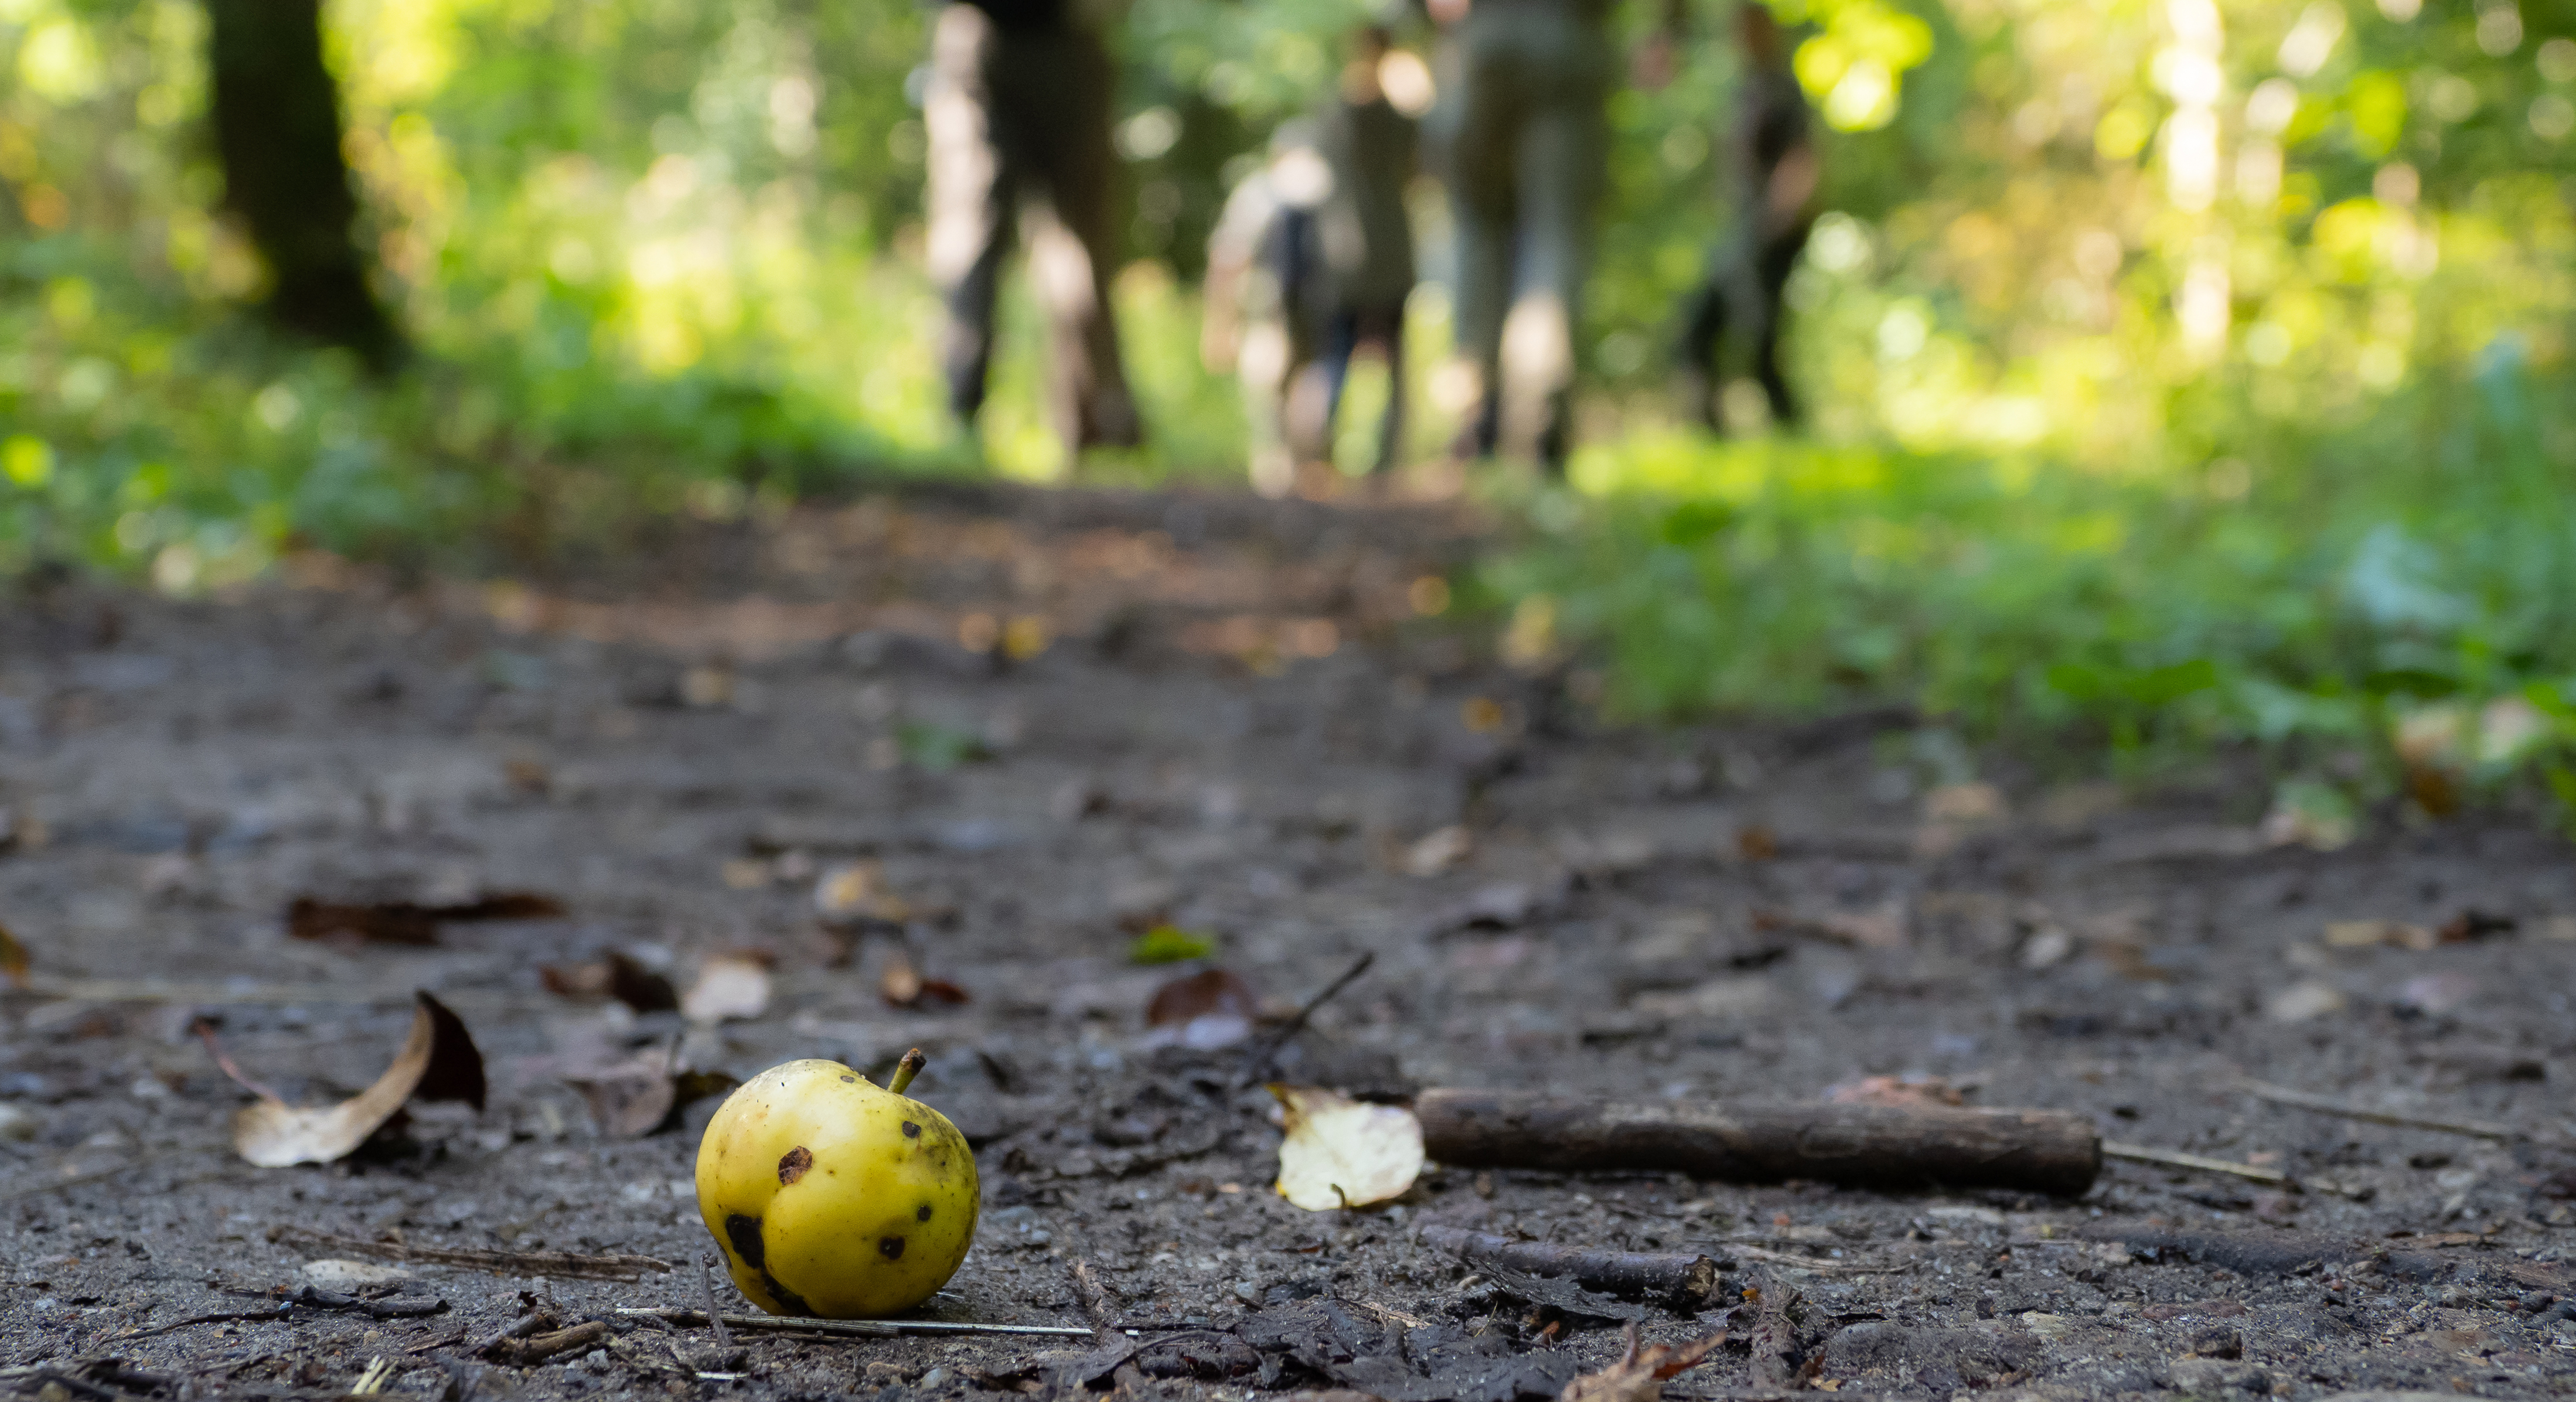 Wild yellow apple on a dirt road